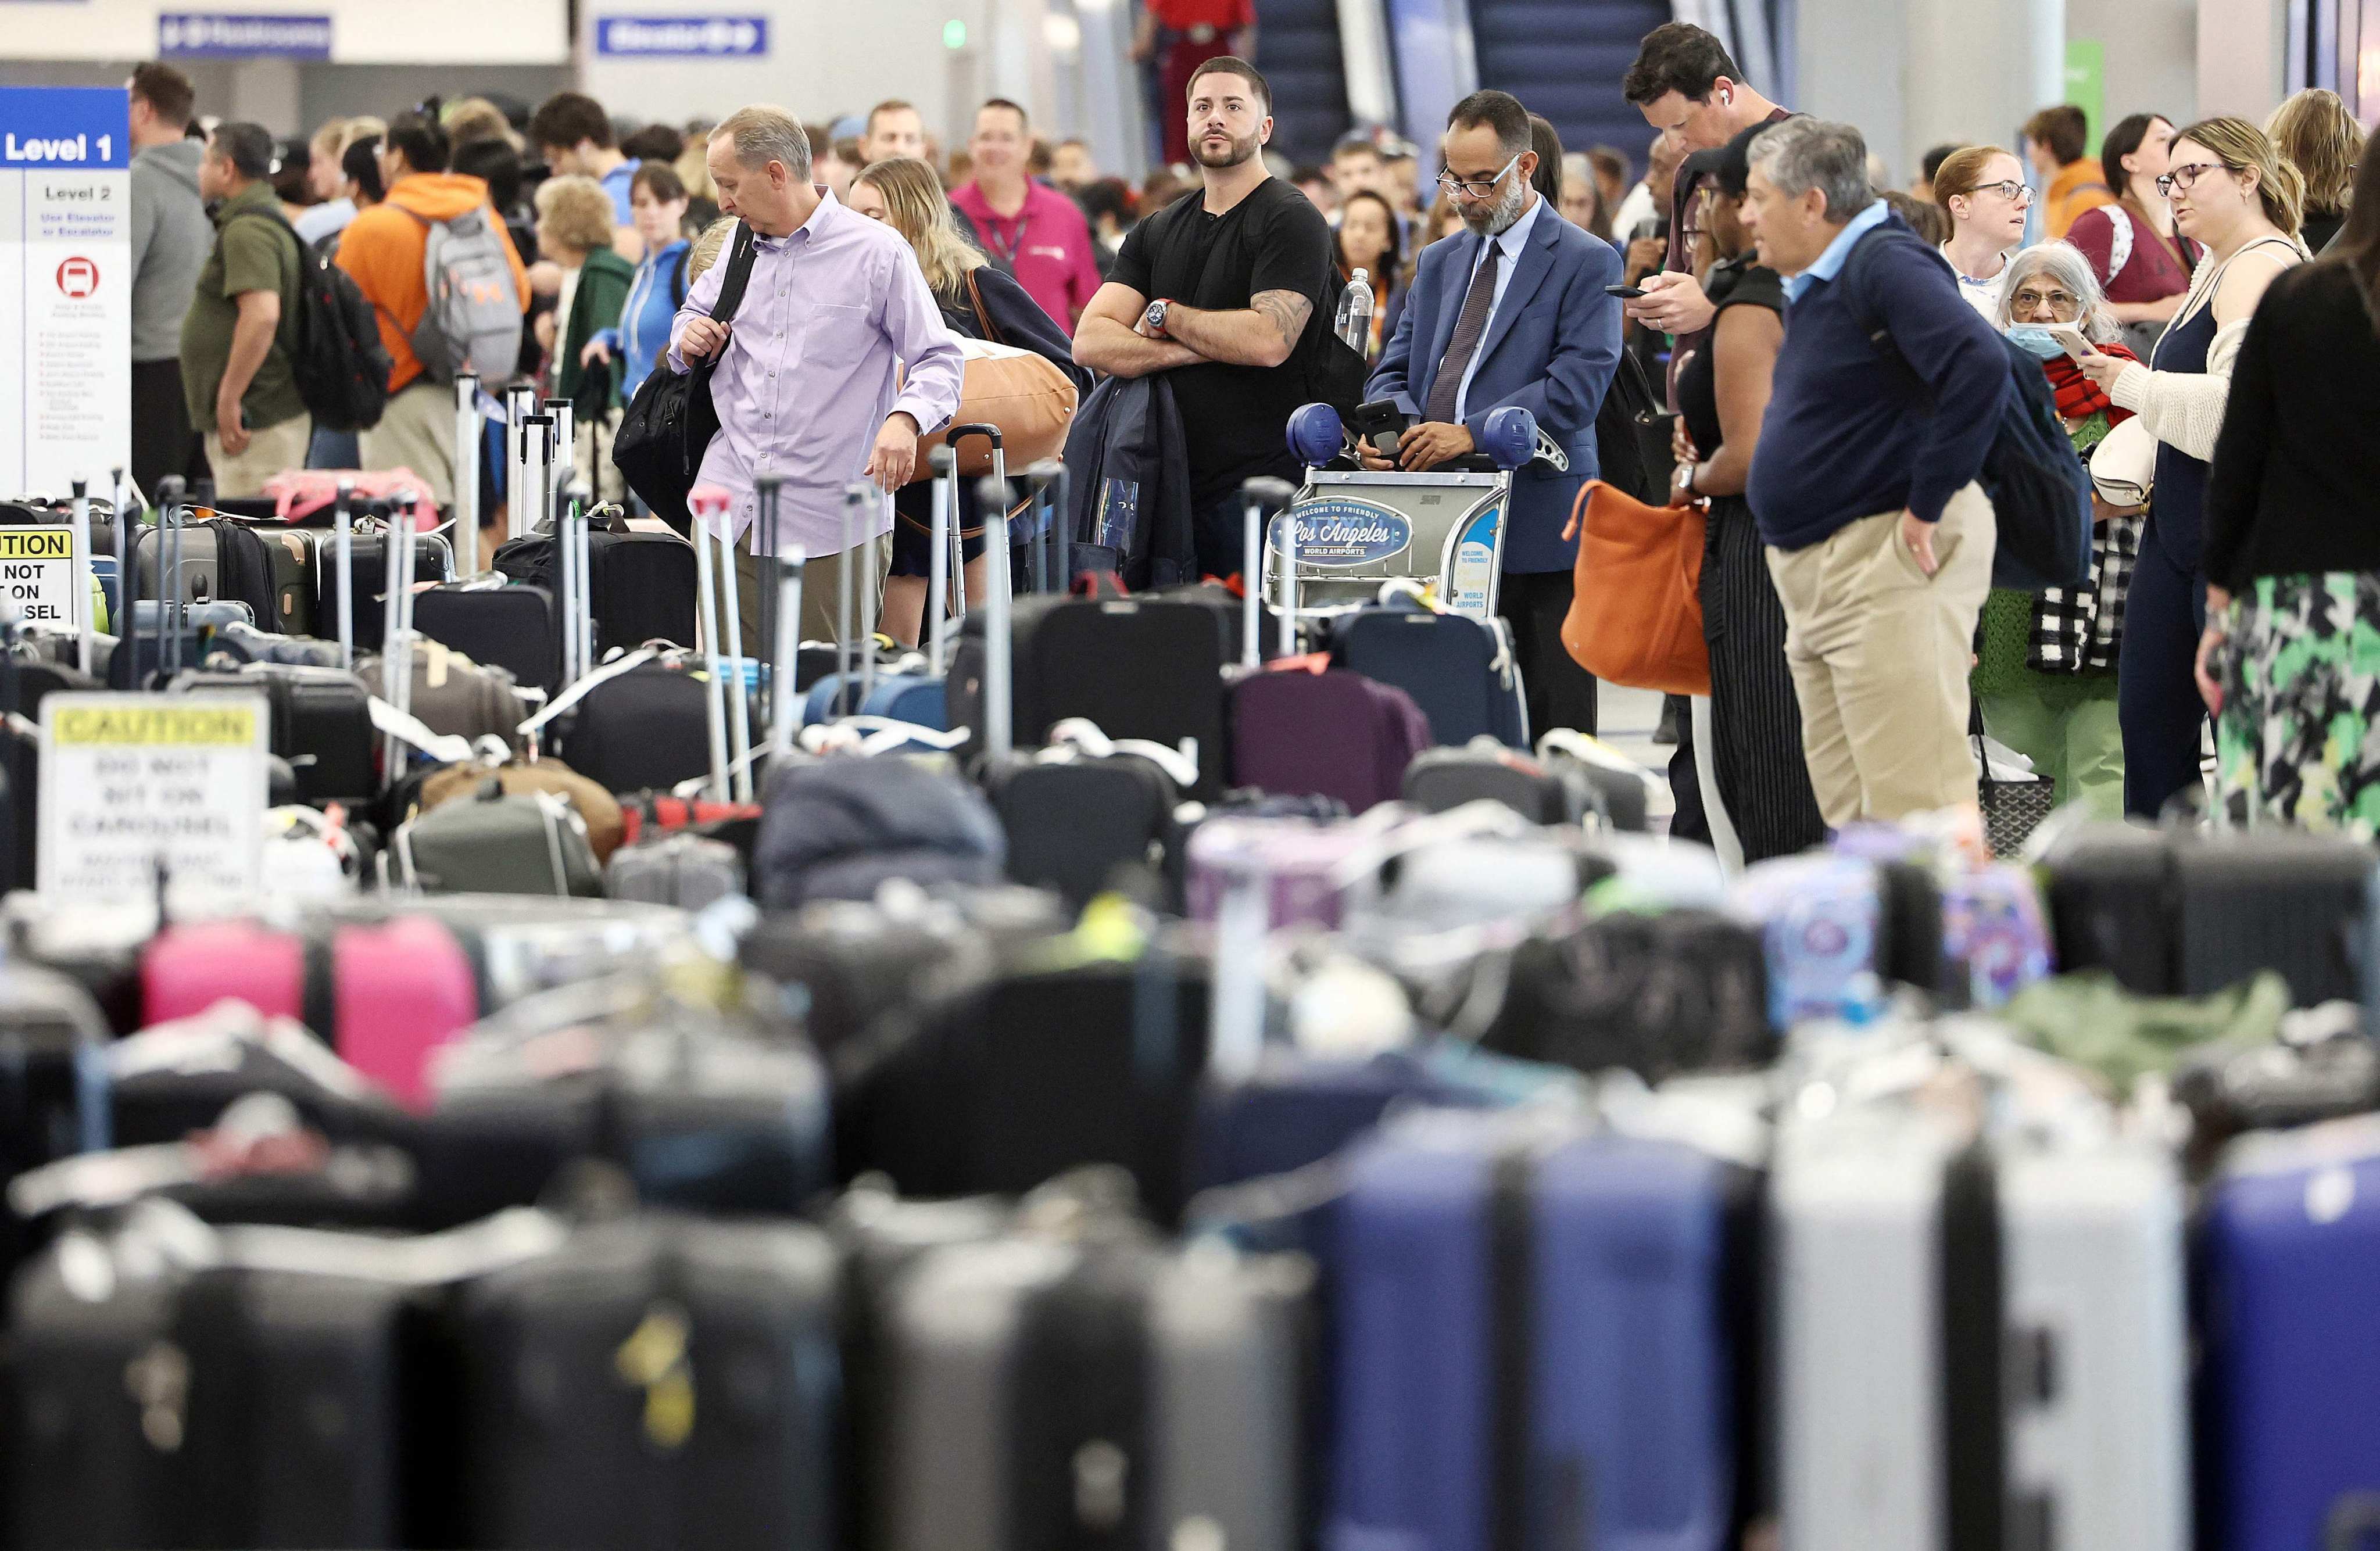 Travellers wait for their bags amid rows of unclaimed luggage at the United Airlines baggage claim area at Los Angeles airport on June 29, amid flight cancellations and delays. CEO Scott Kirby could have shown remorse by donating to a charitable fund in honour of affected United passengers and employees, or dedicating a pay cut to employees. Photo: Getty Images via AFP